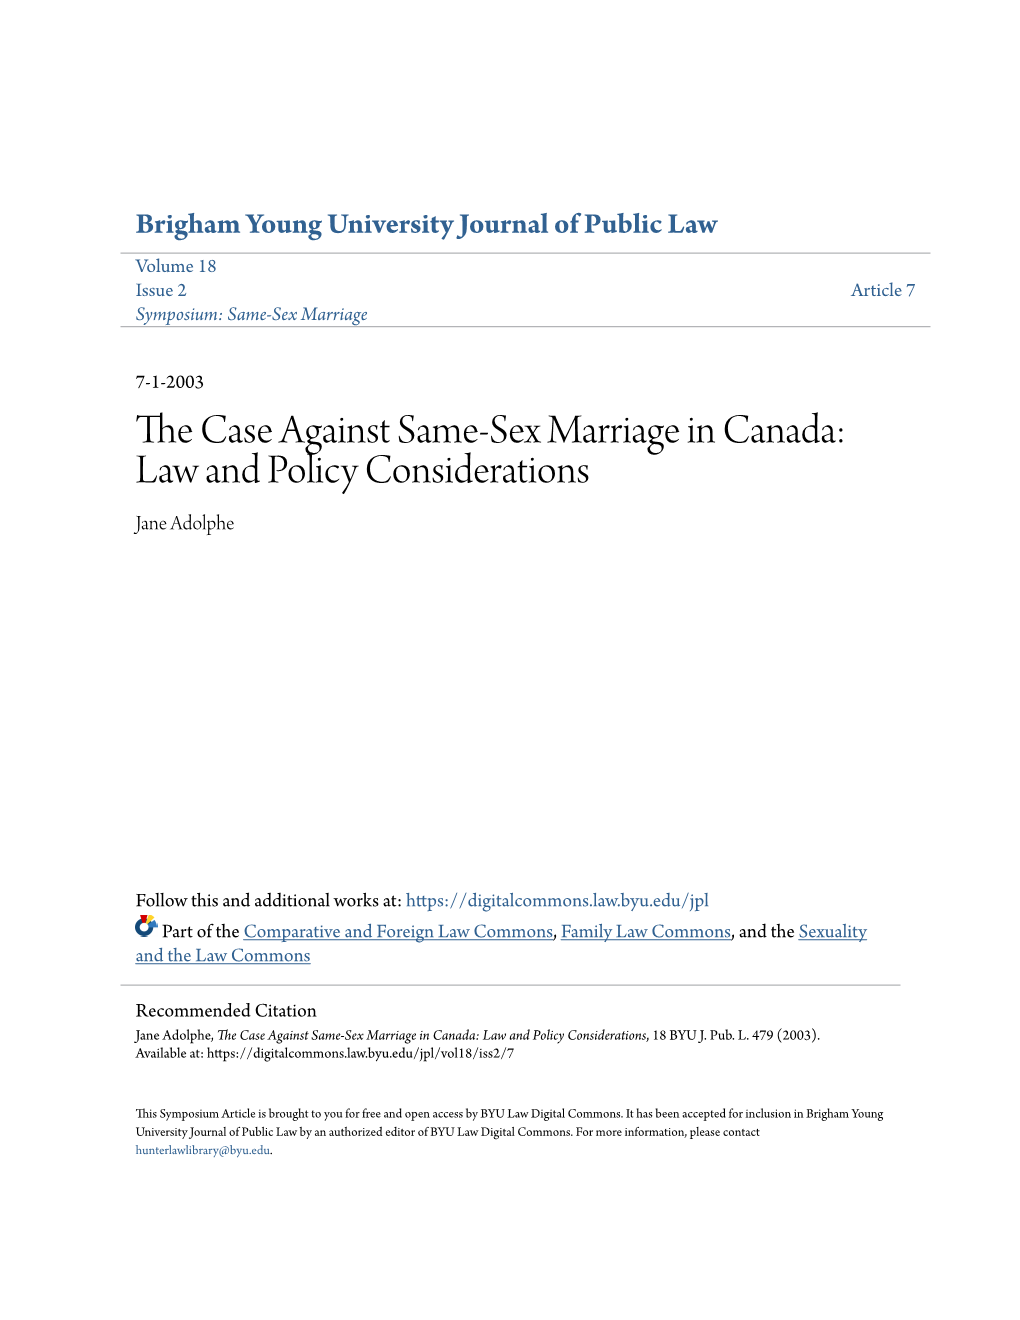 The Case Against Same-Sex Marriage in Canada: Law and Policy Considerations, 18 BYU J